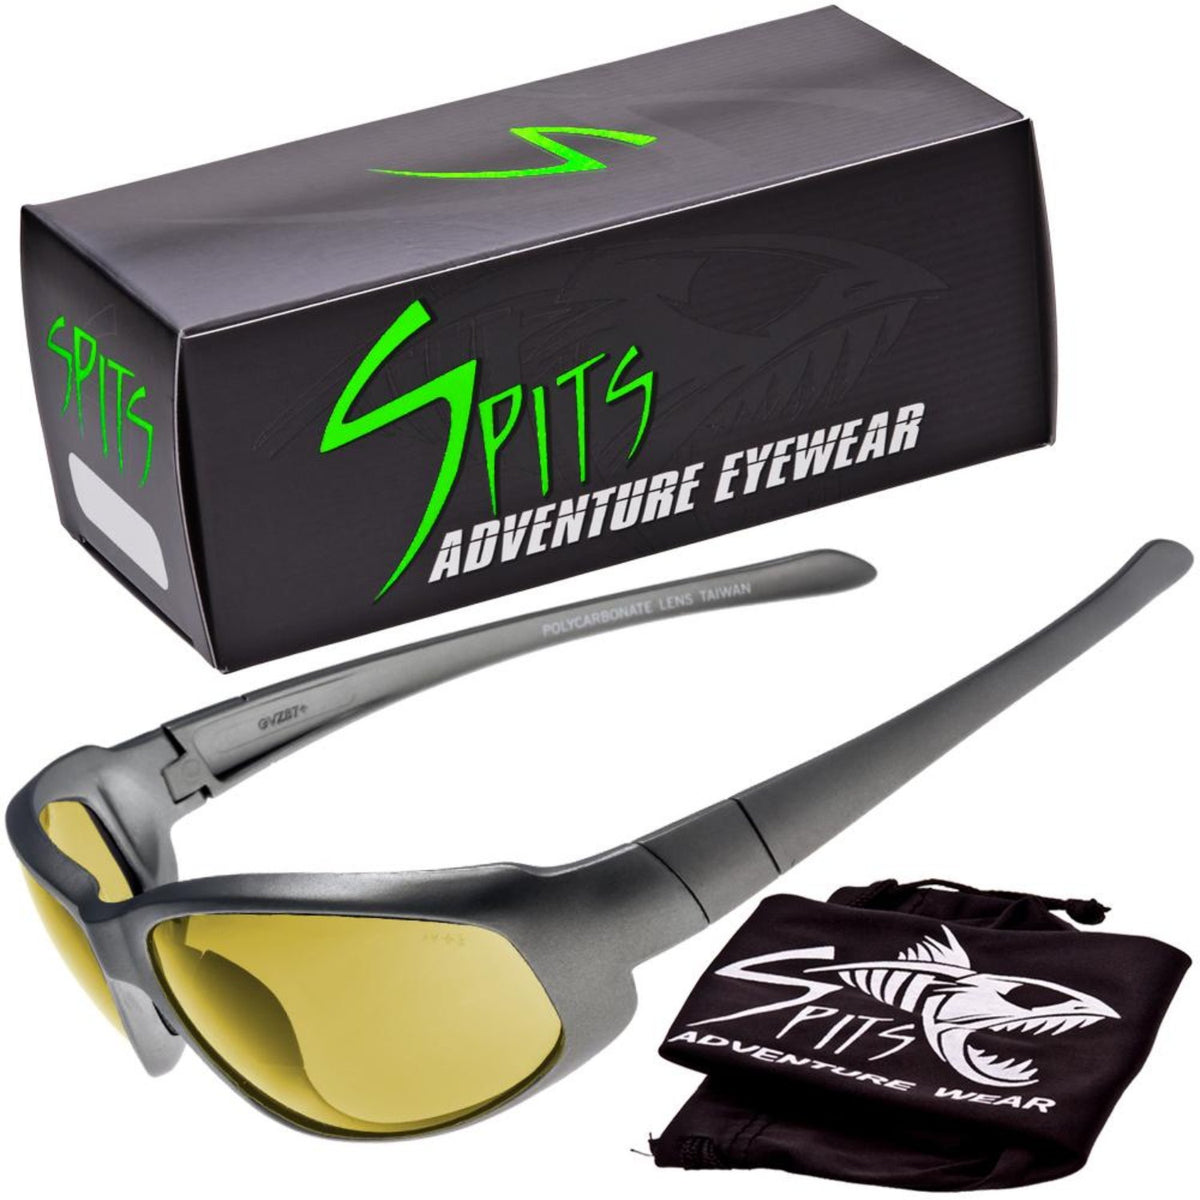 Sniper Gray -  Safety Rated Sunglasses Various Lens Colors, Photochromic and Foam Padding Options